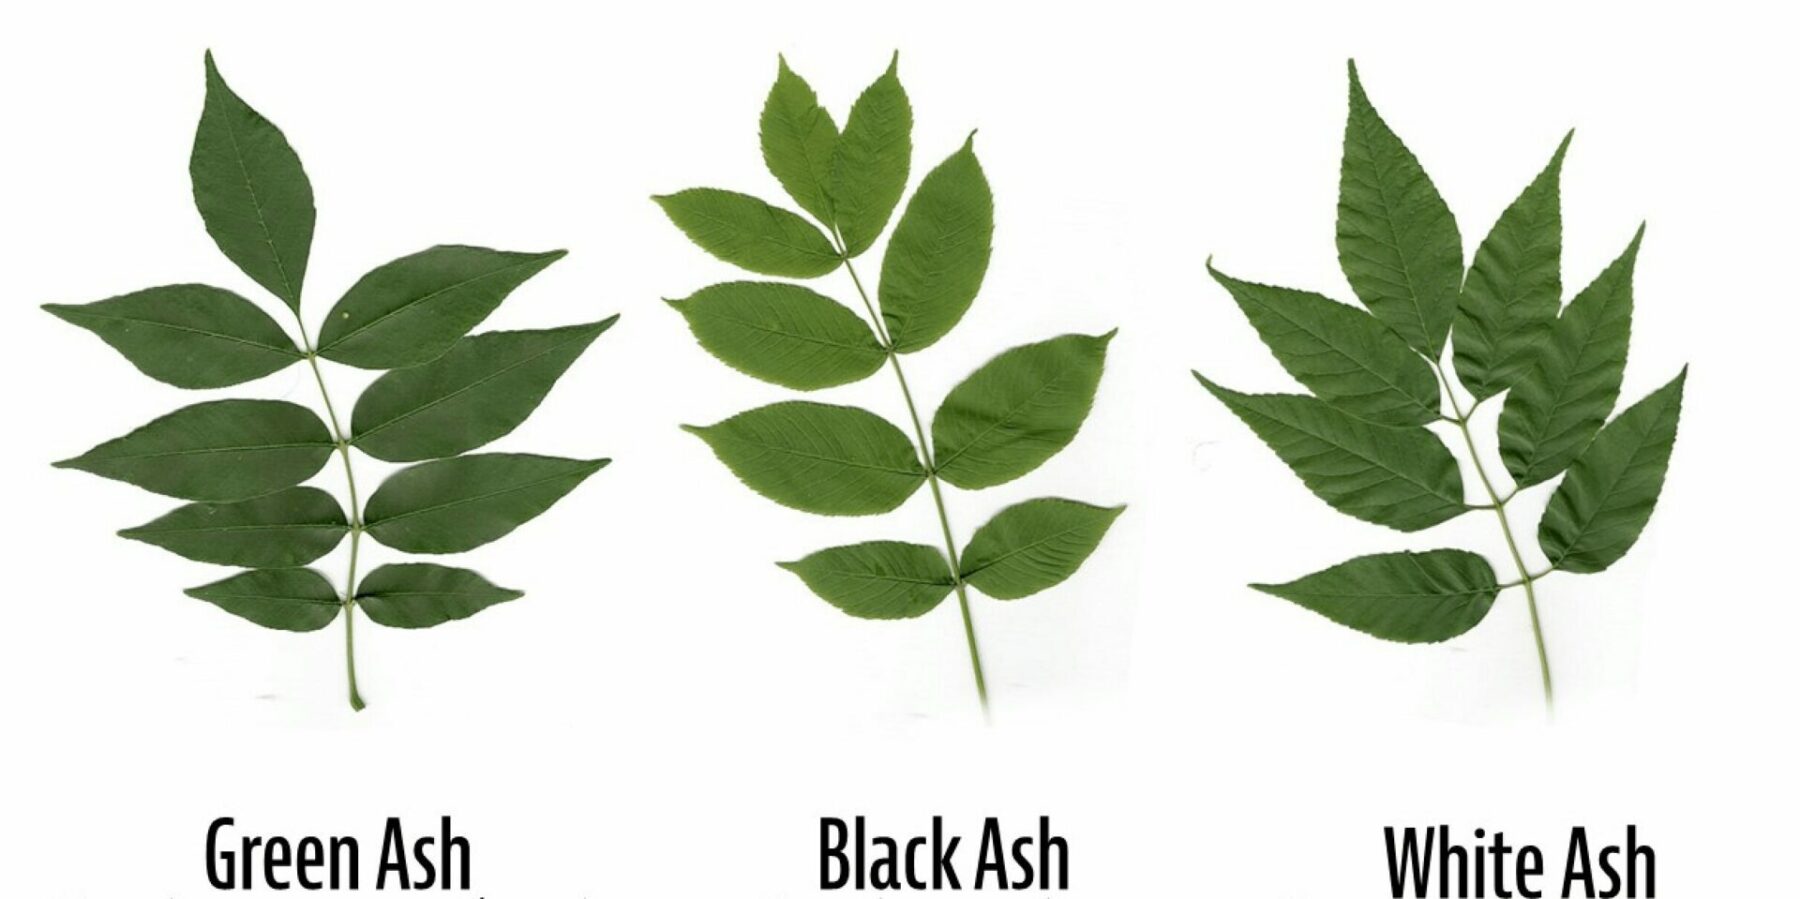 The different types of Ash tree leaves